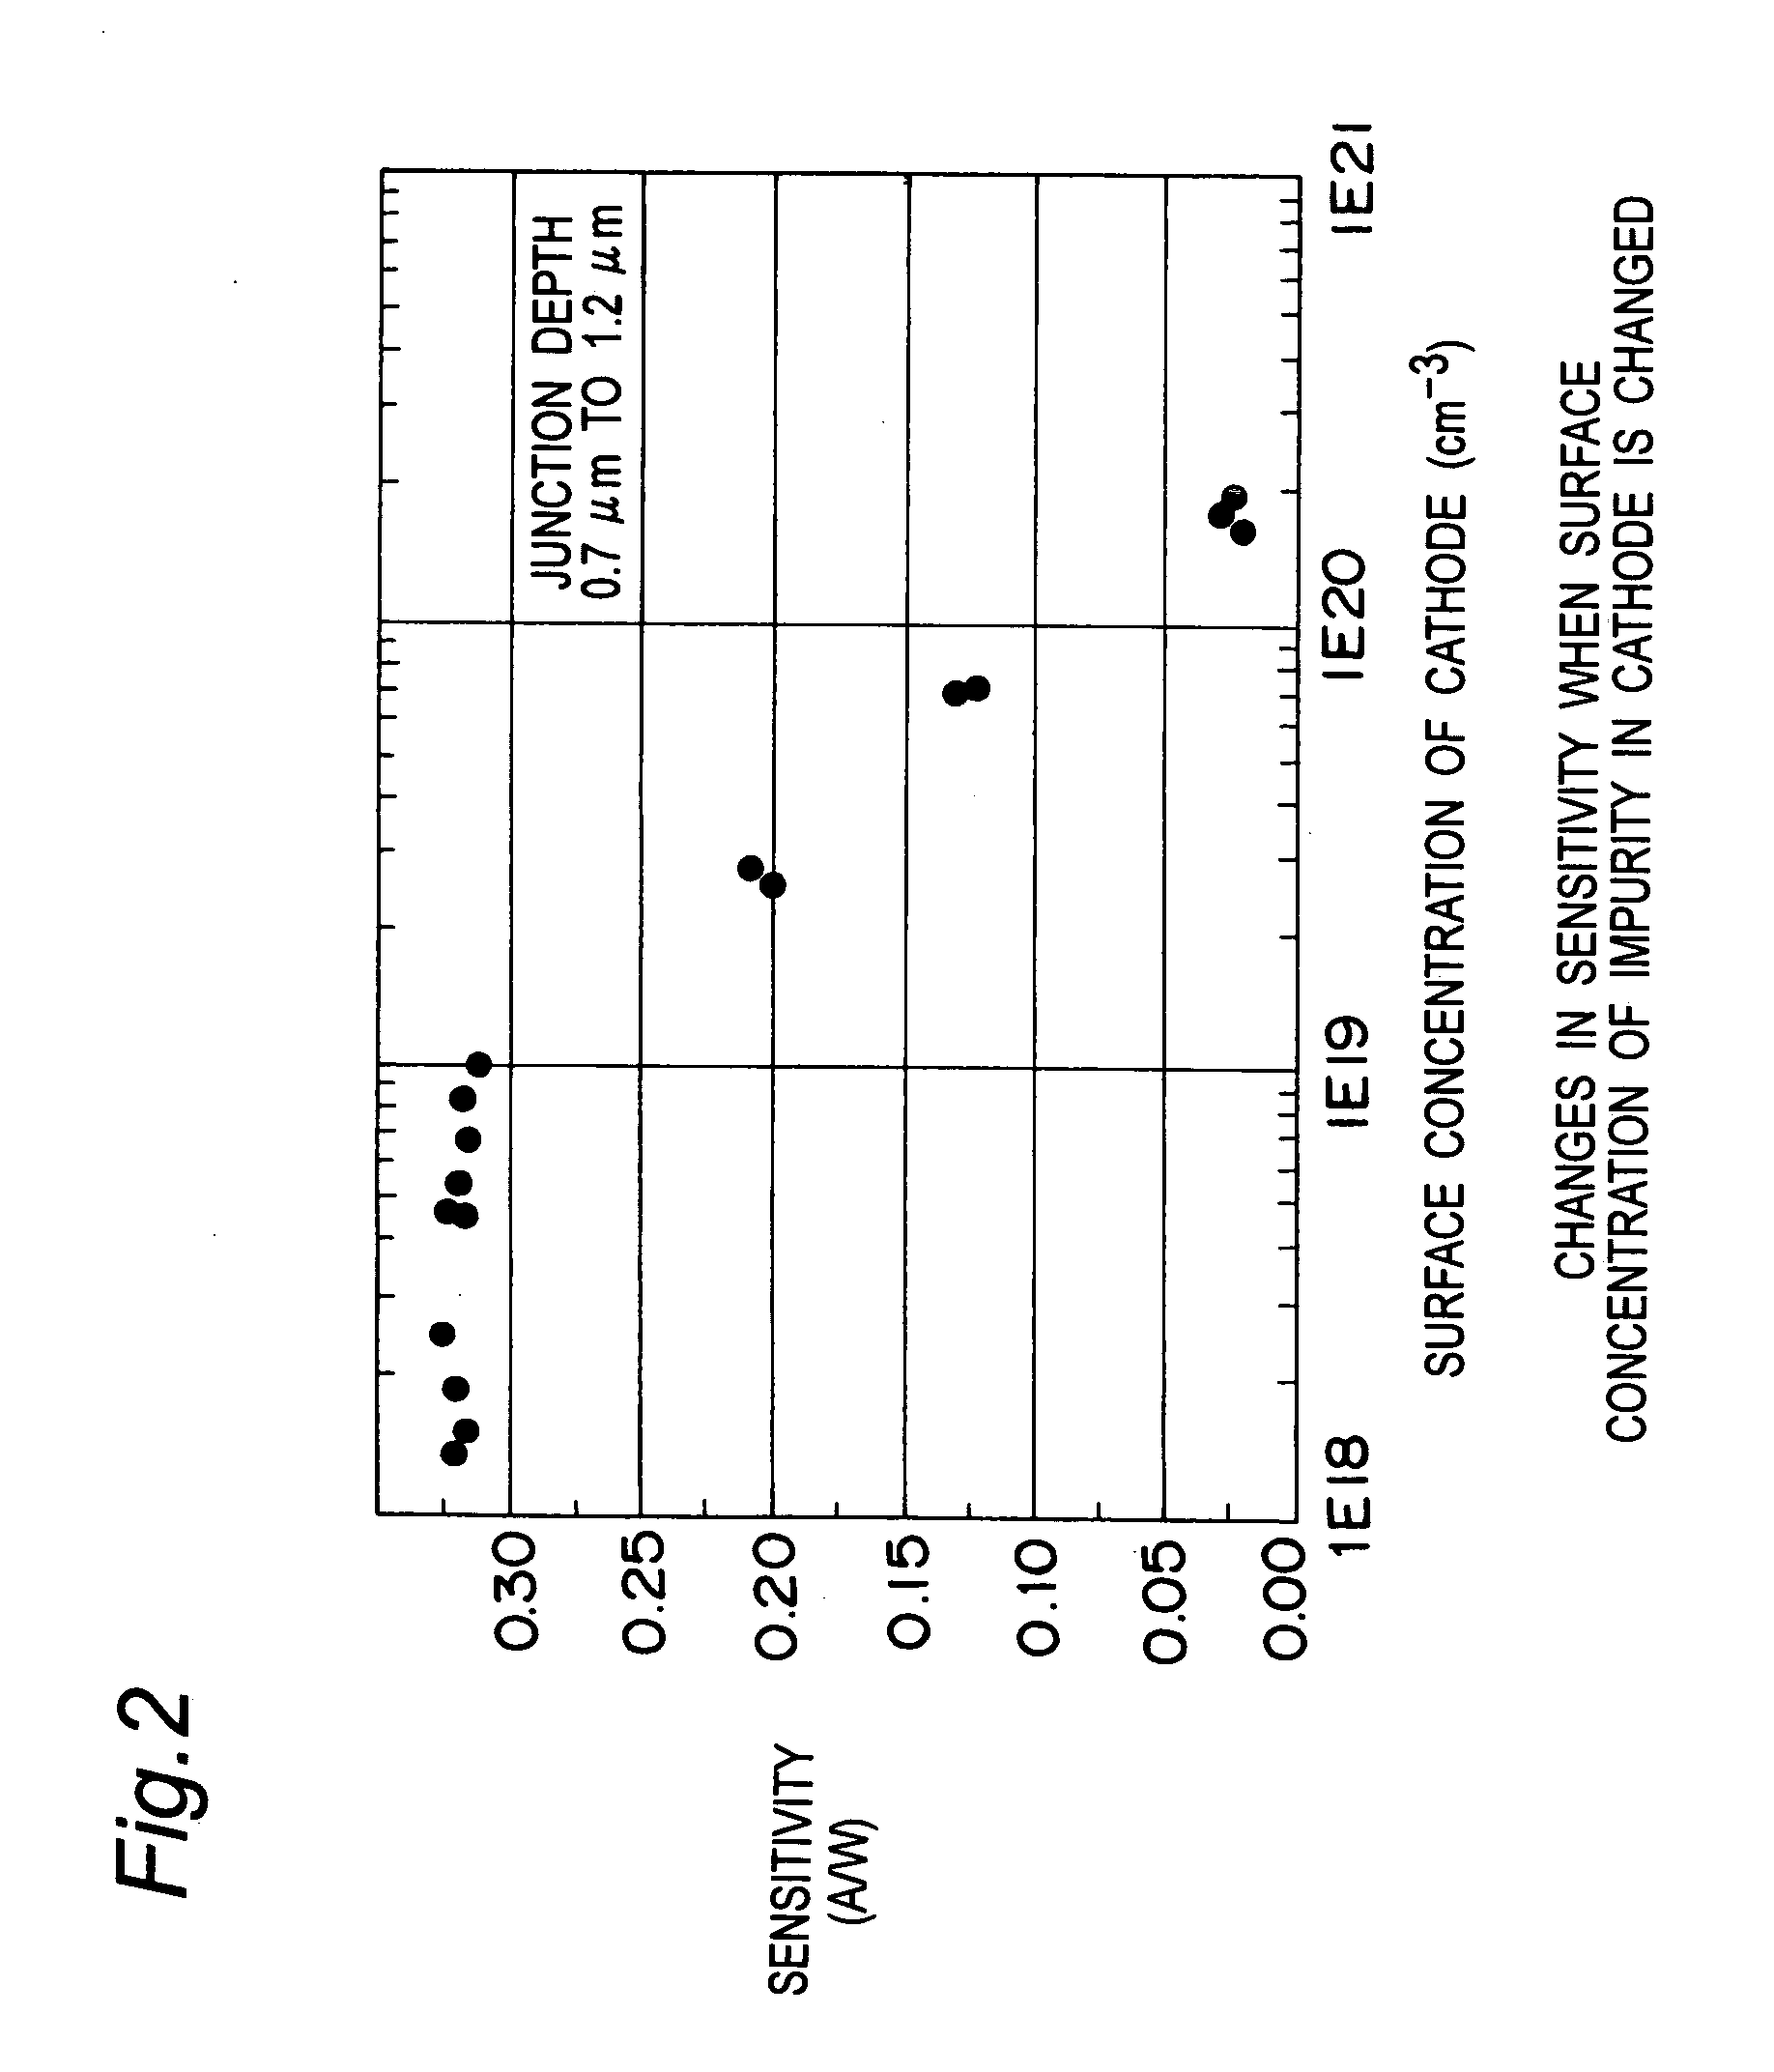 Light receiving element and light receiving device incorporating circuit and optical disc drive